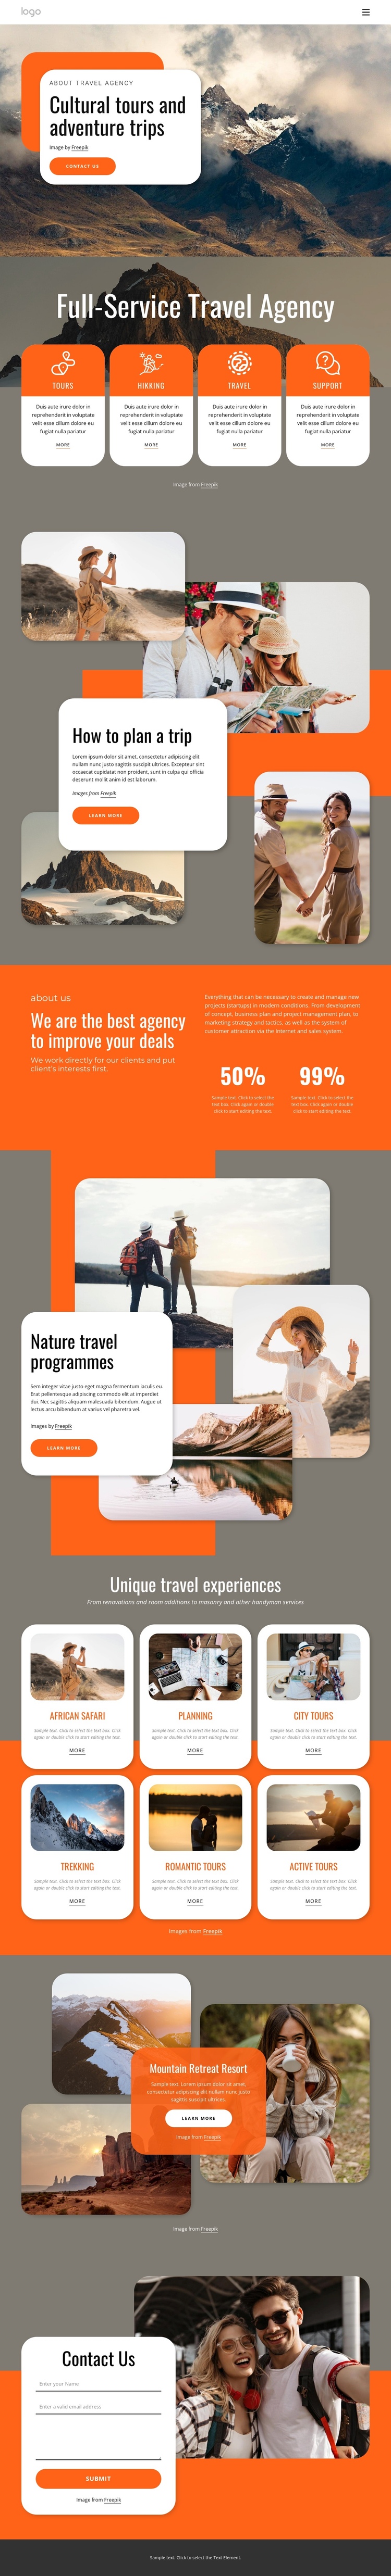 Group travel for all ages Website Builder Software